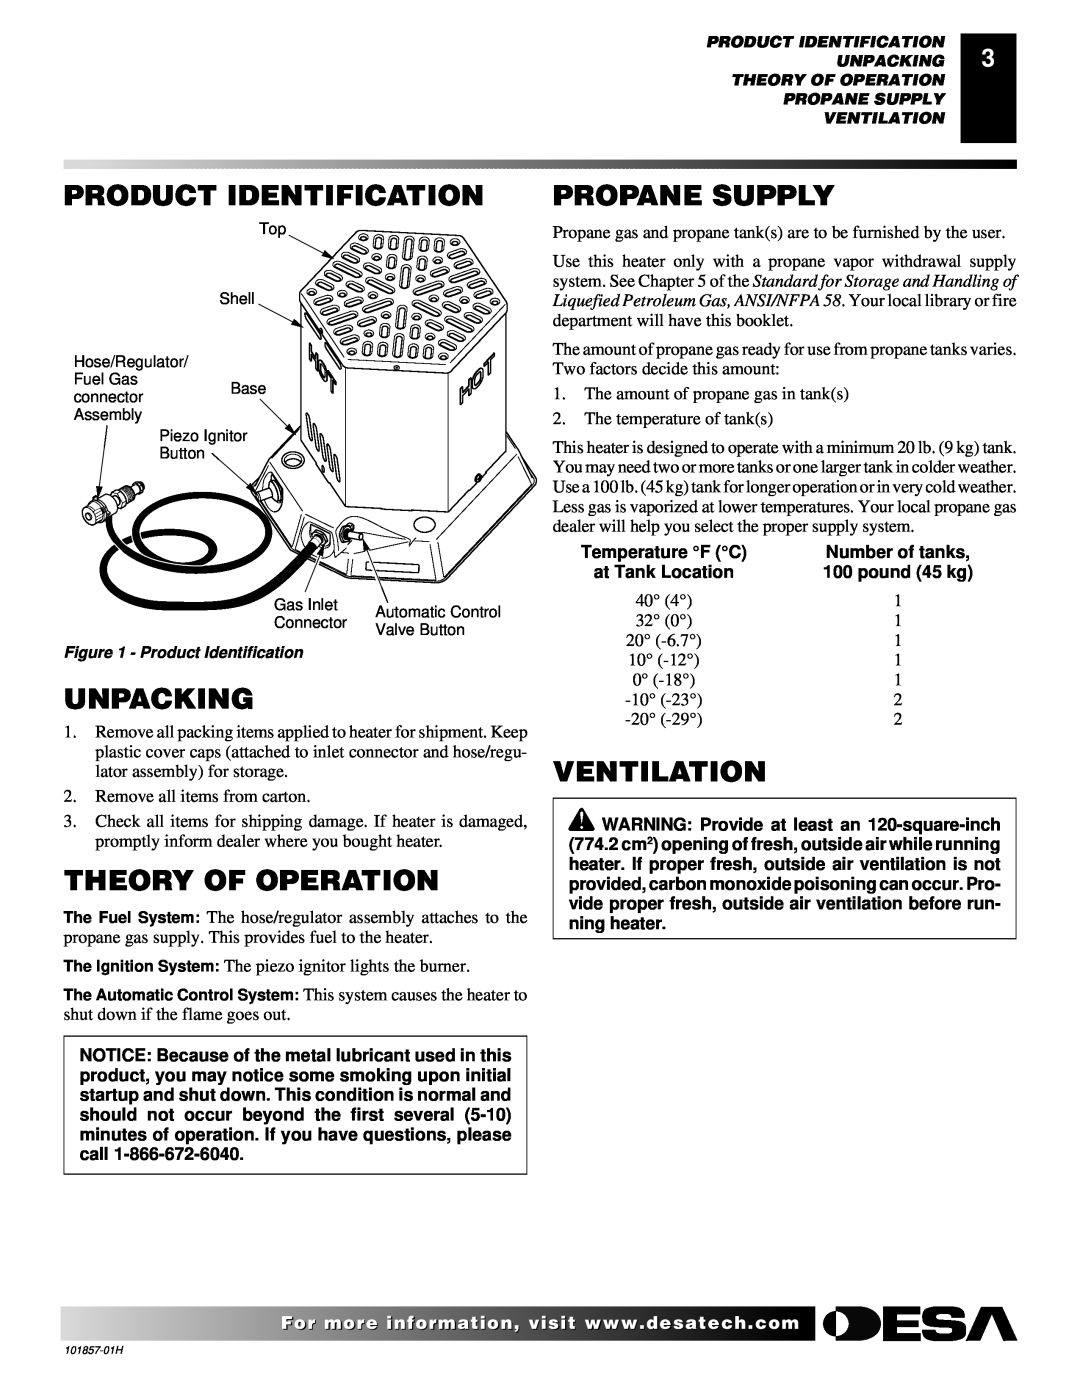 Desa TC25 owner manual Product Identification, Unpacking, Theory Of Operation, Propane Supply, Ventilation 